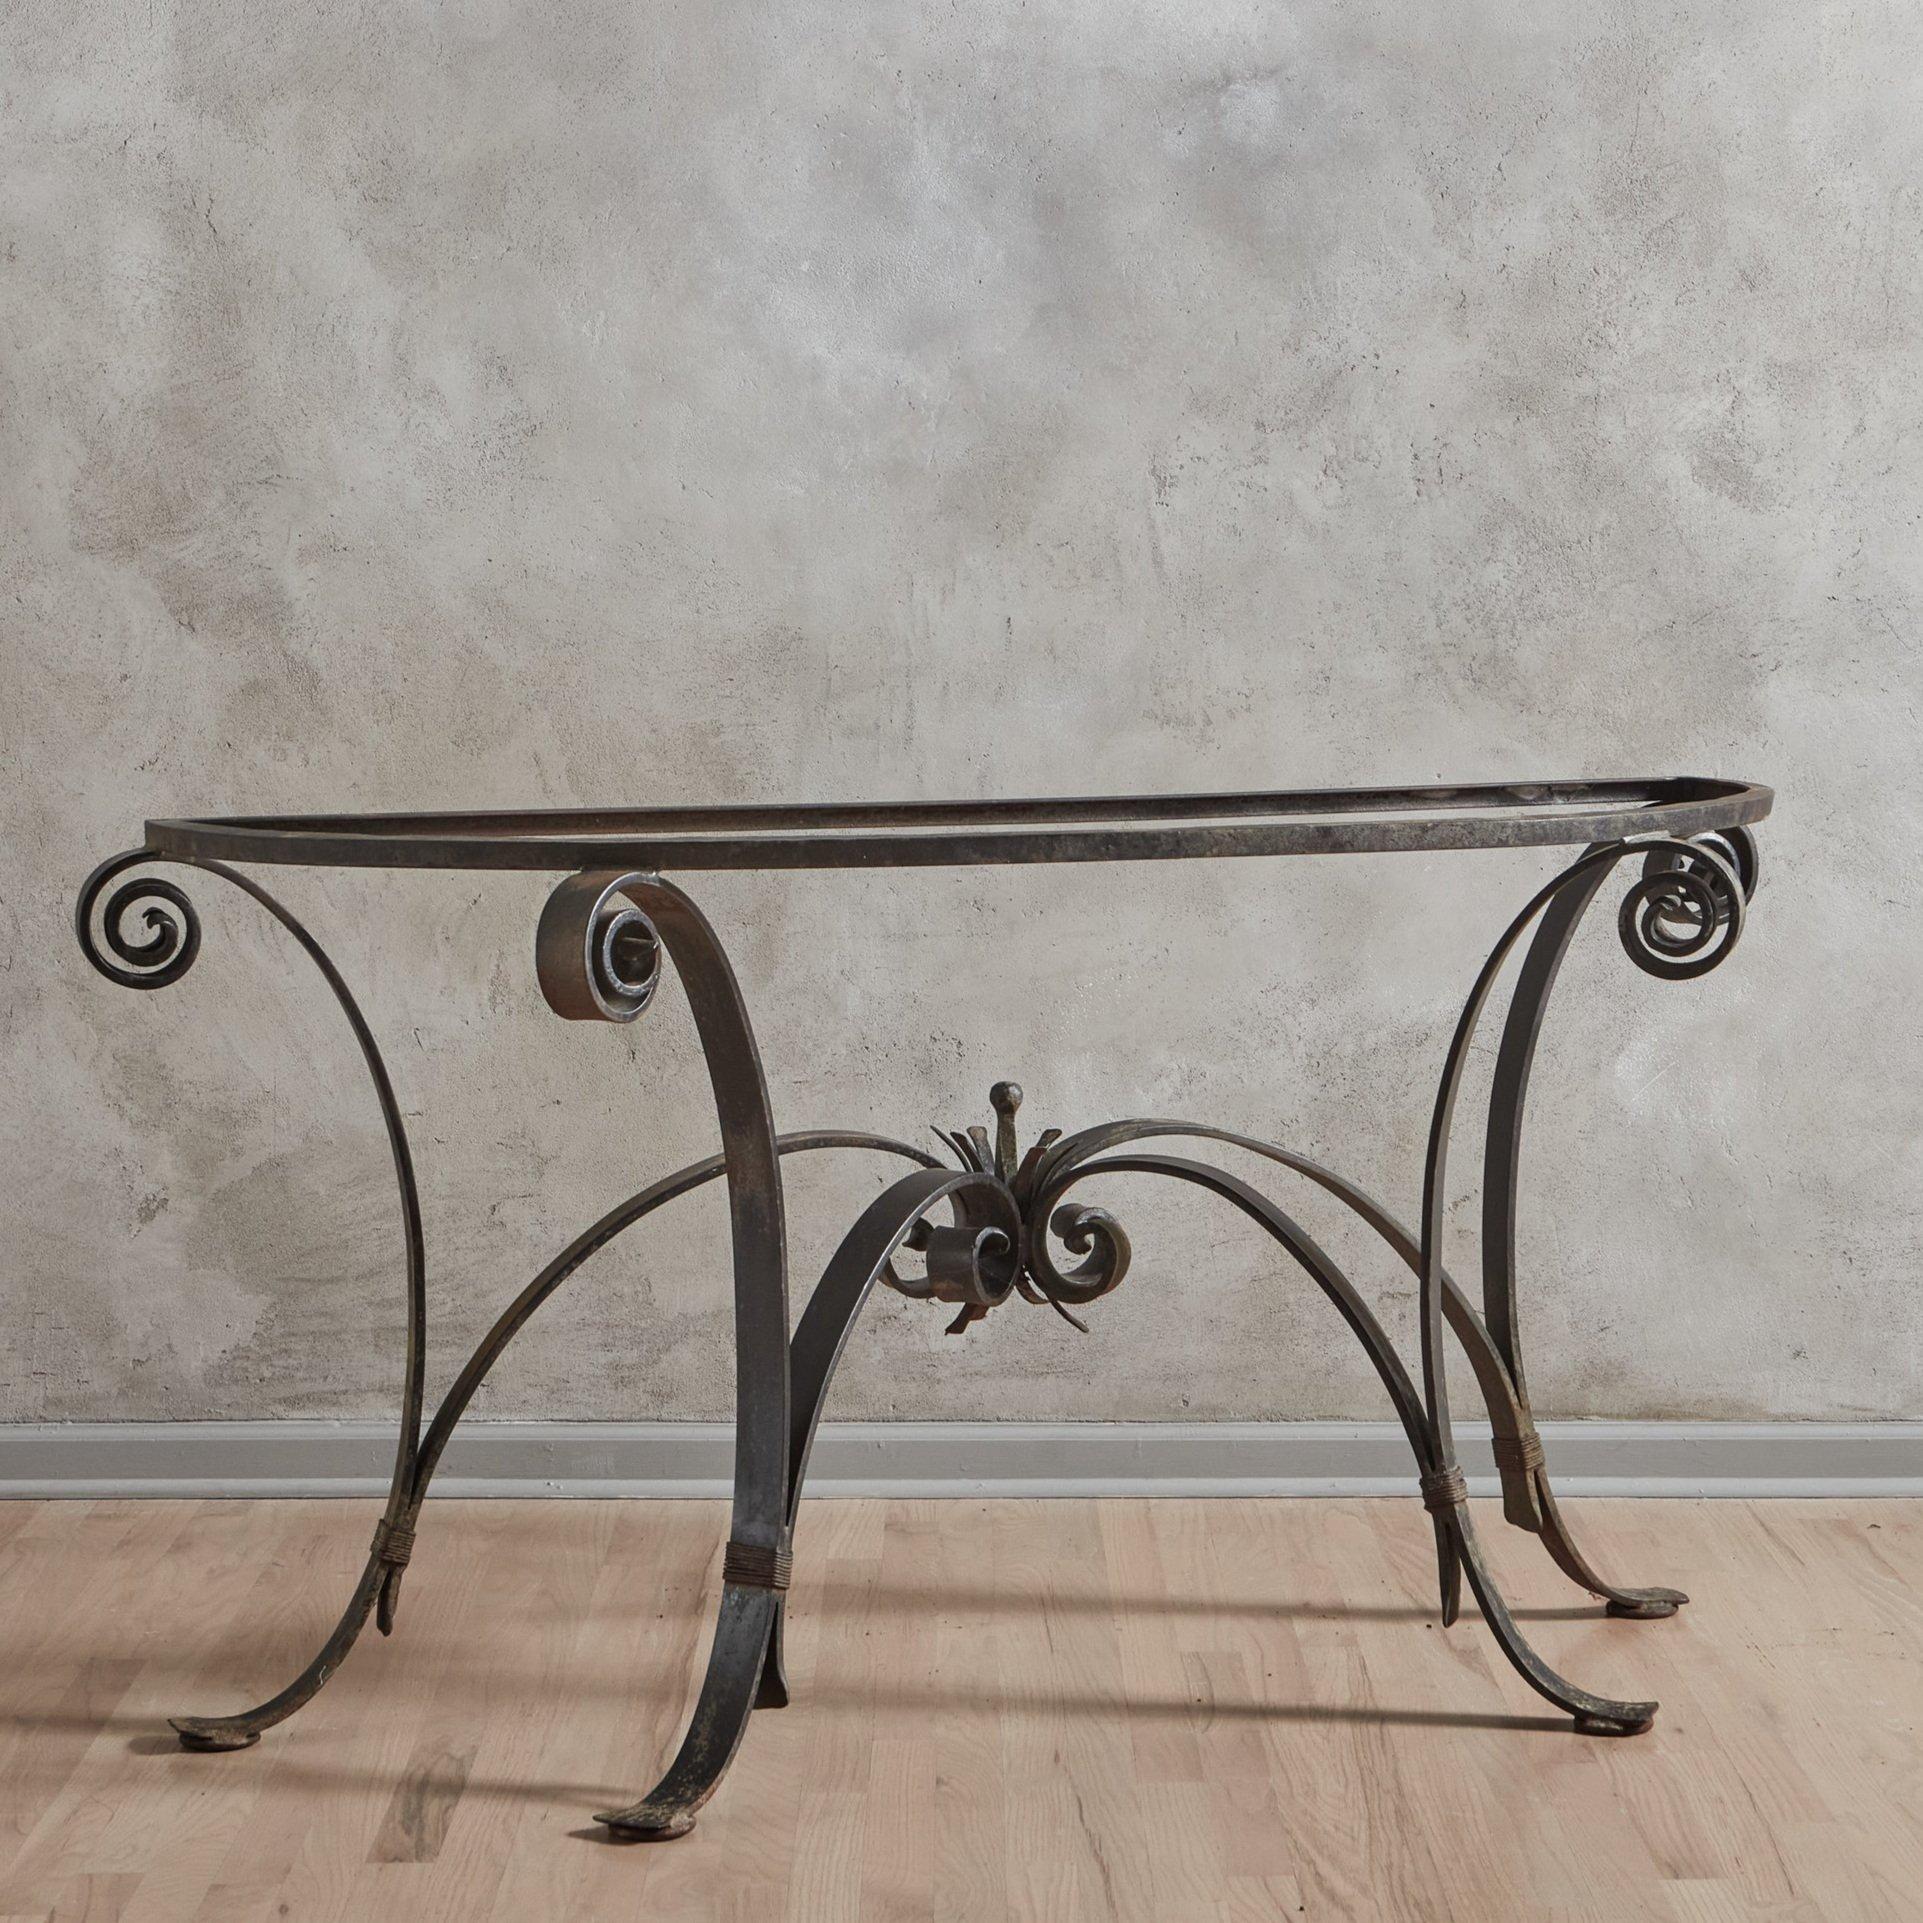 A 1940s French console table featuring an intricate wrought iron base with scroll motifs and a decorative central finial, which is supported by four curved support bars. This table has a new 1” thick honed green demilune soapstone table top with